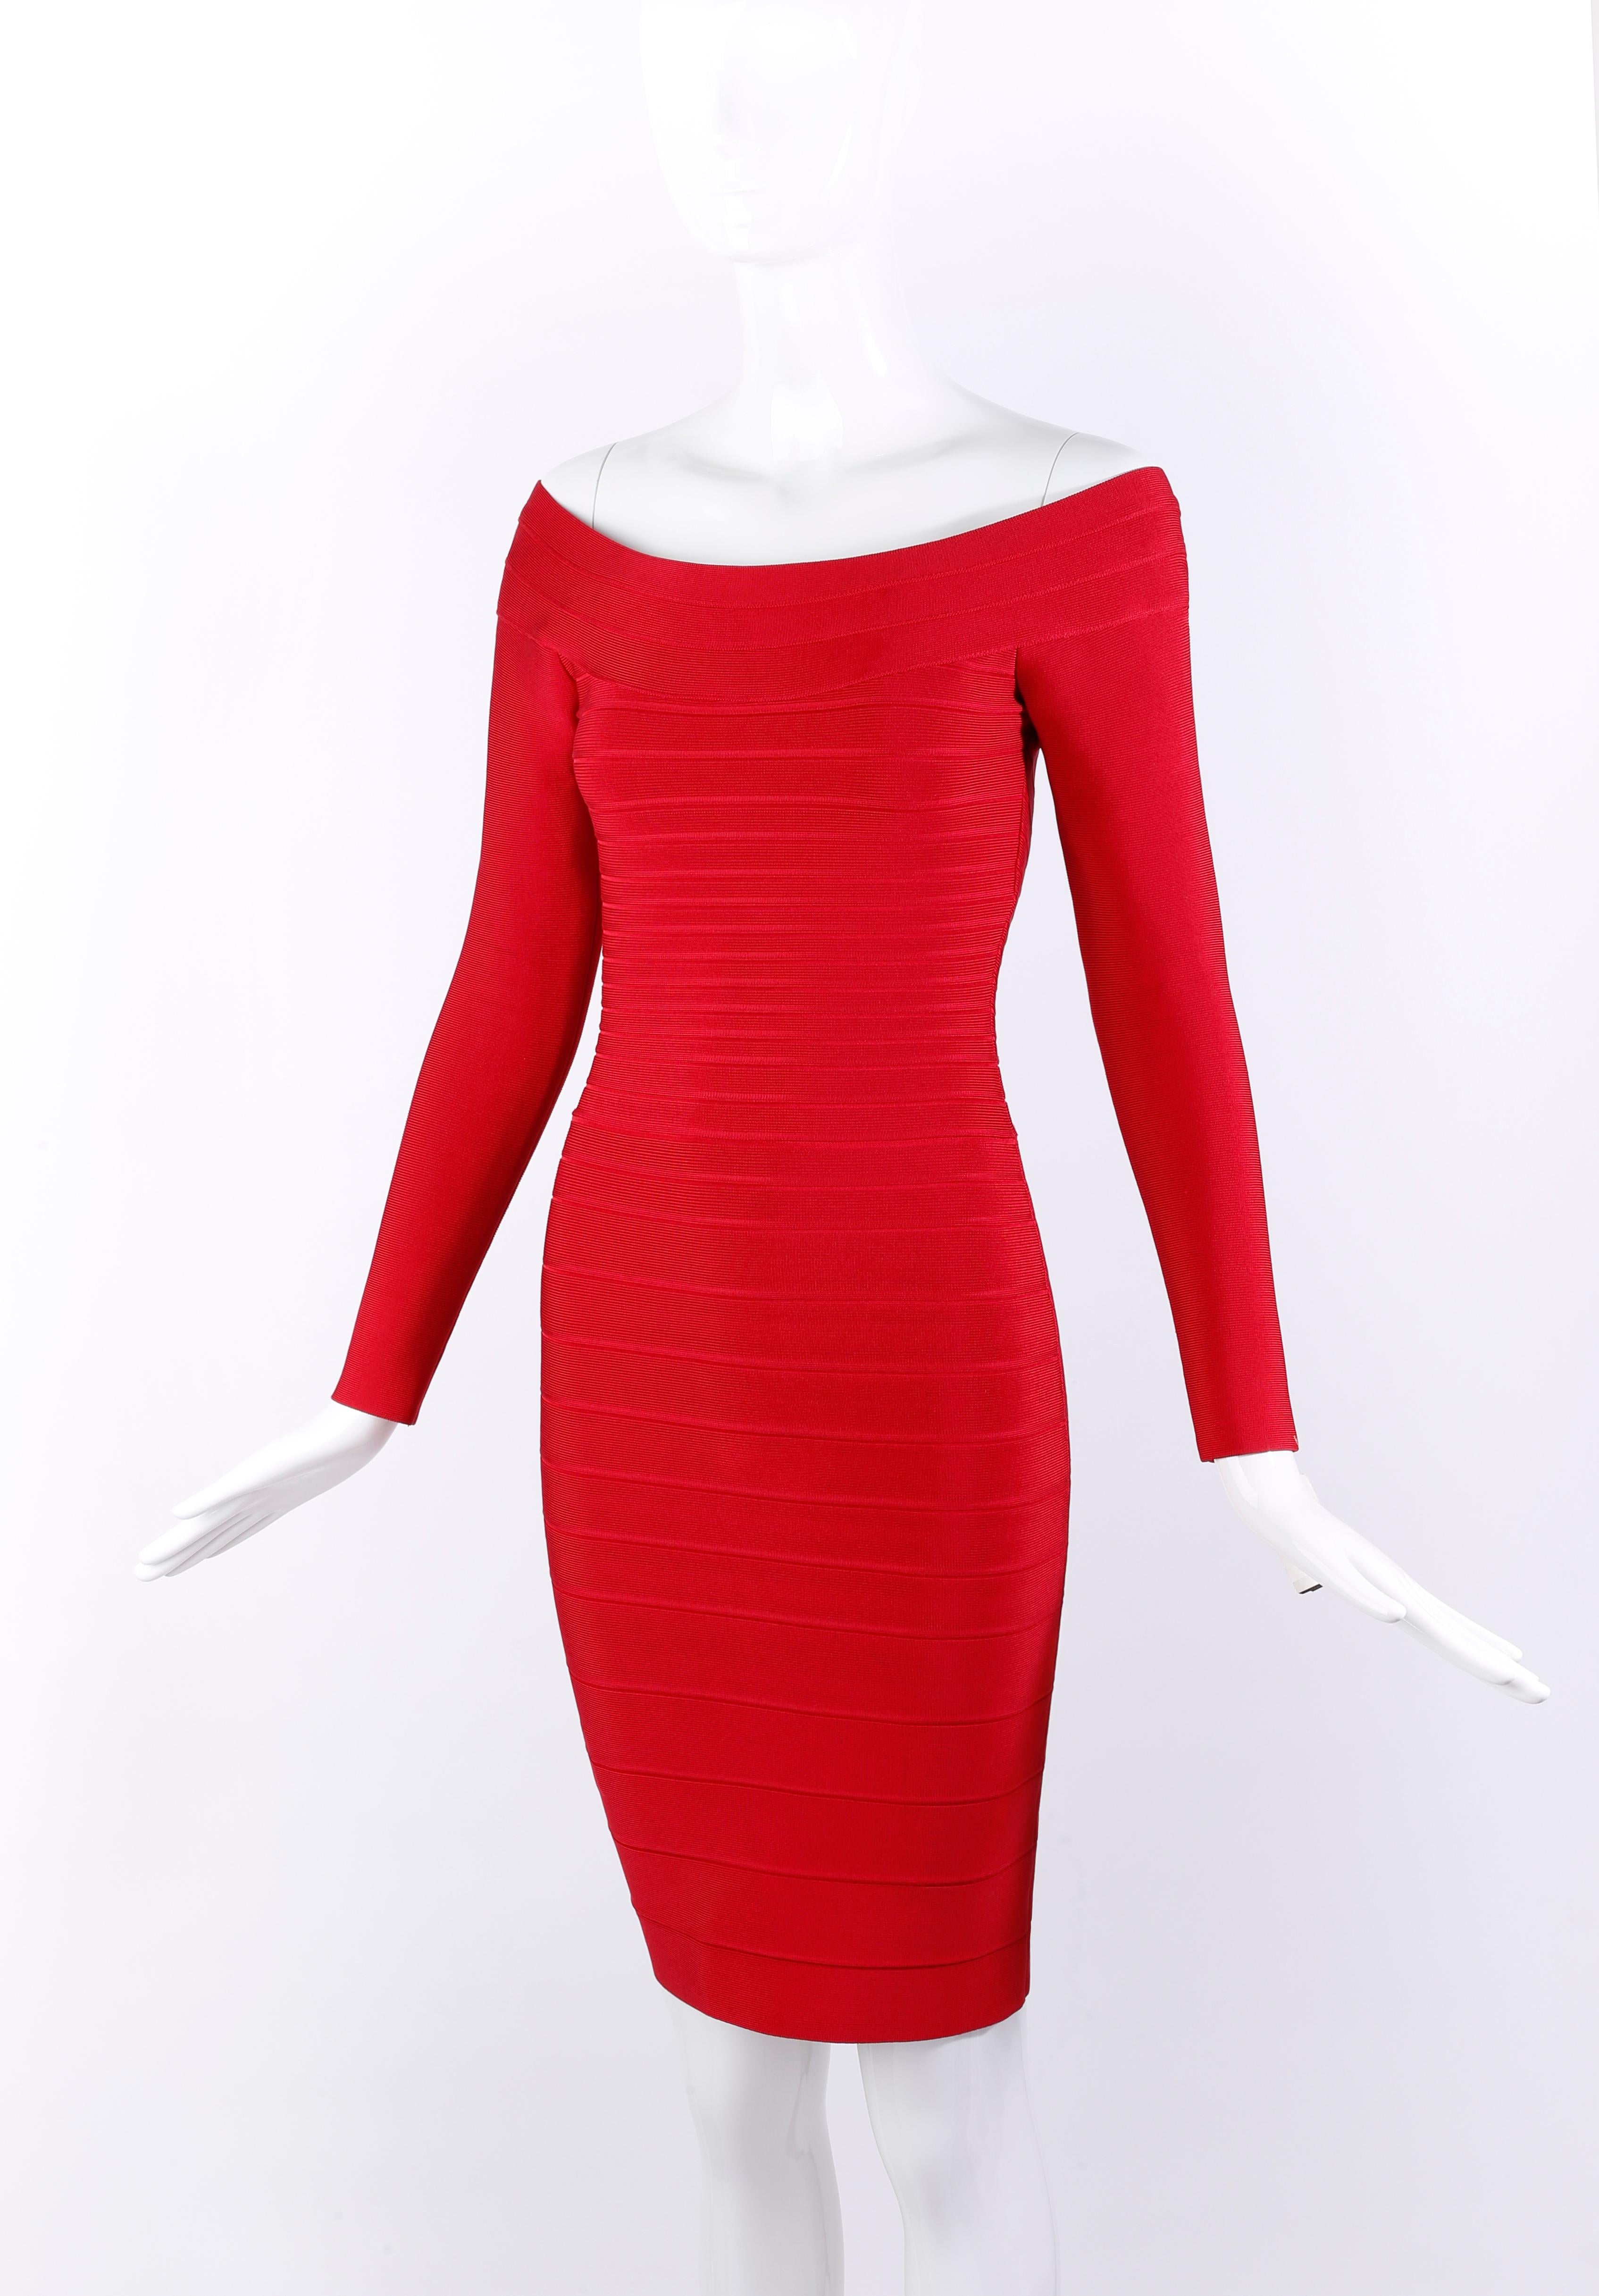 Herve Leger Candice Lip Stick Red Off The Shoulder Long Sleeve Bodycon Dress XS In Excellent Condition For Sale In Chicago, IL